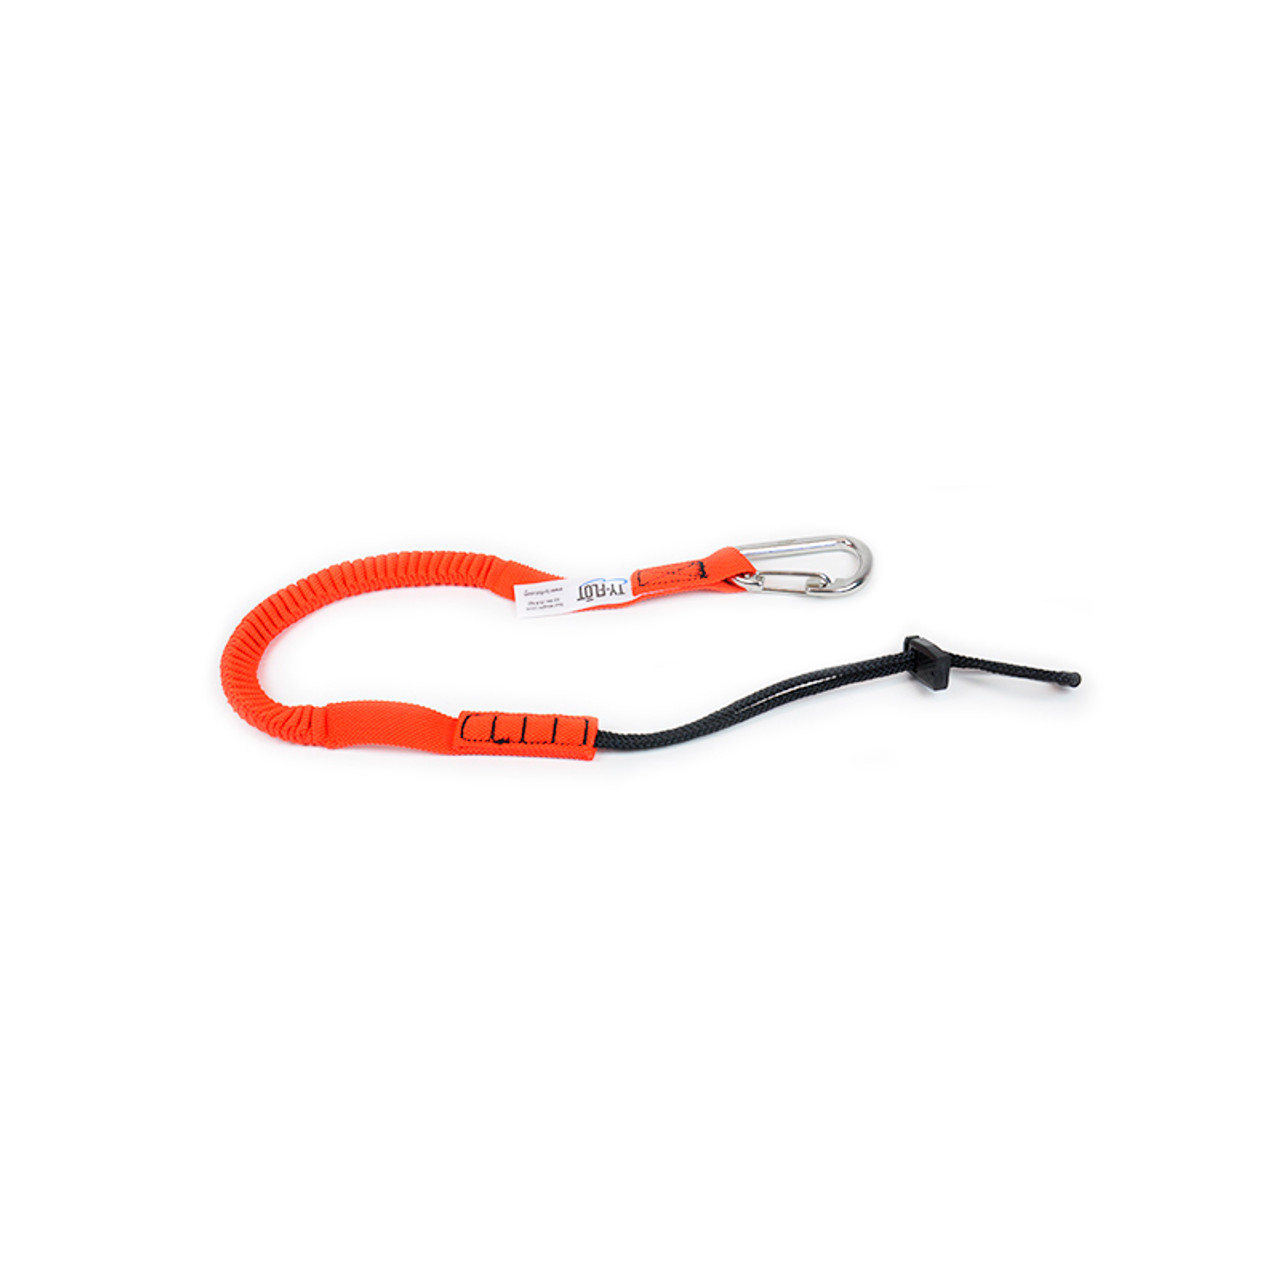 Tool Lanyard Safety Harness Lanyard Bungee Cord With Carabiner